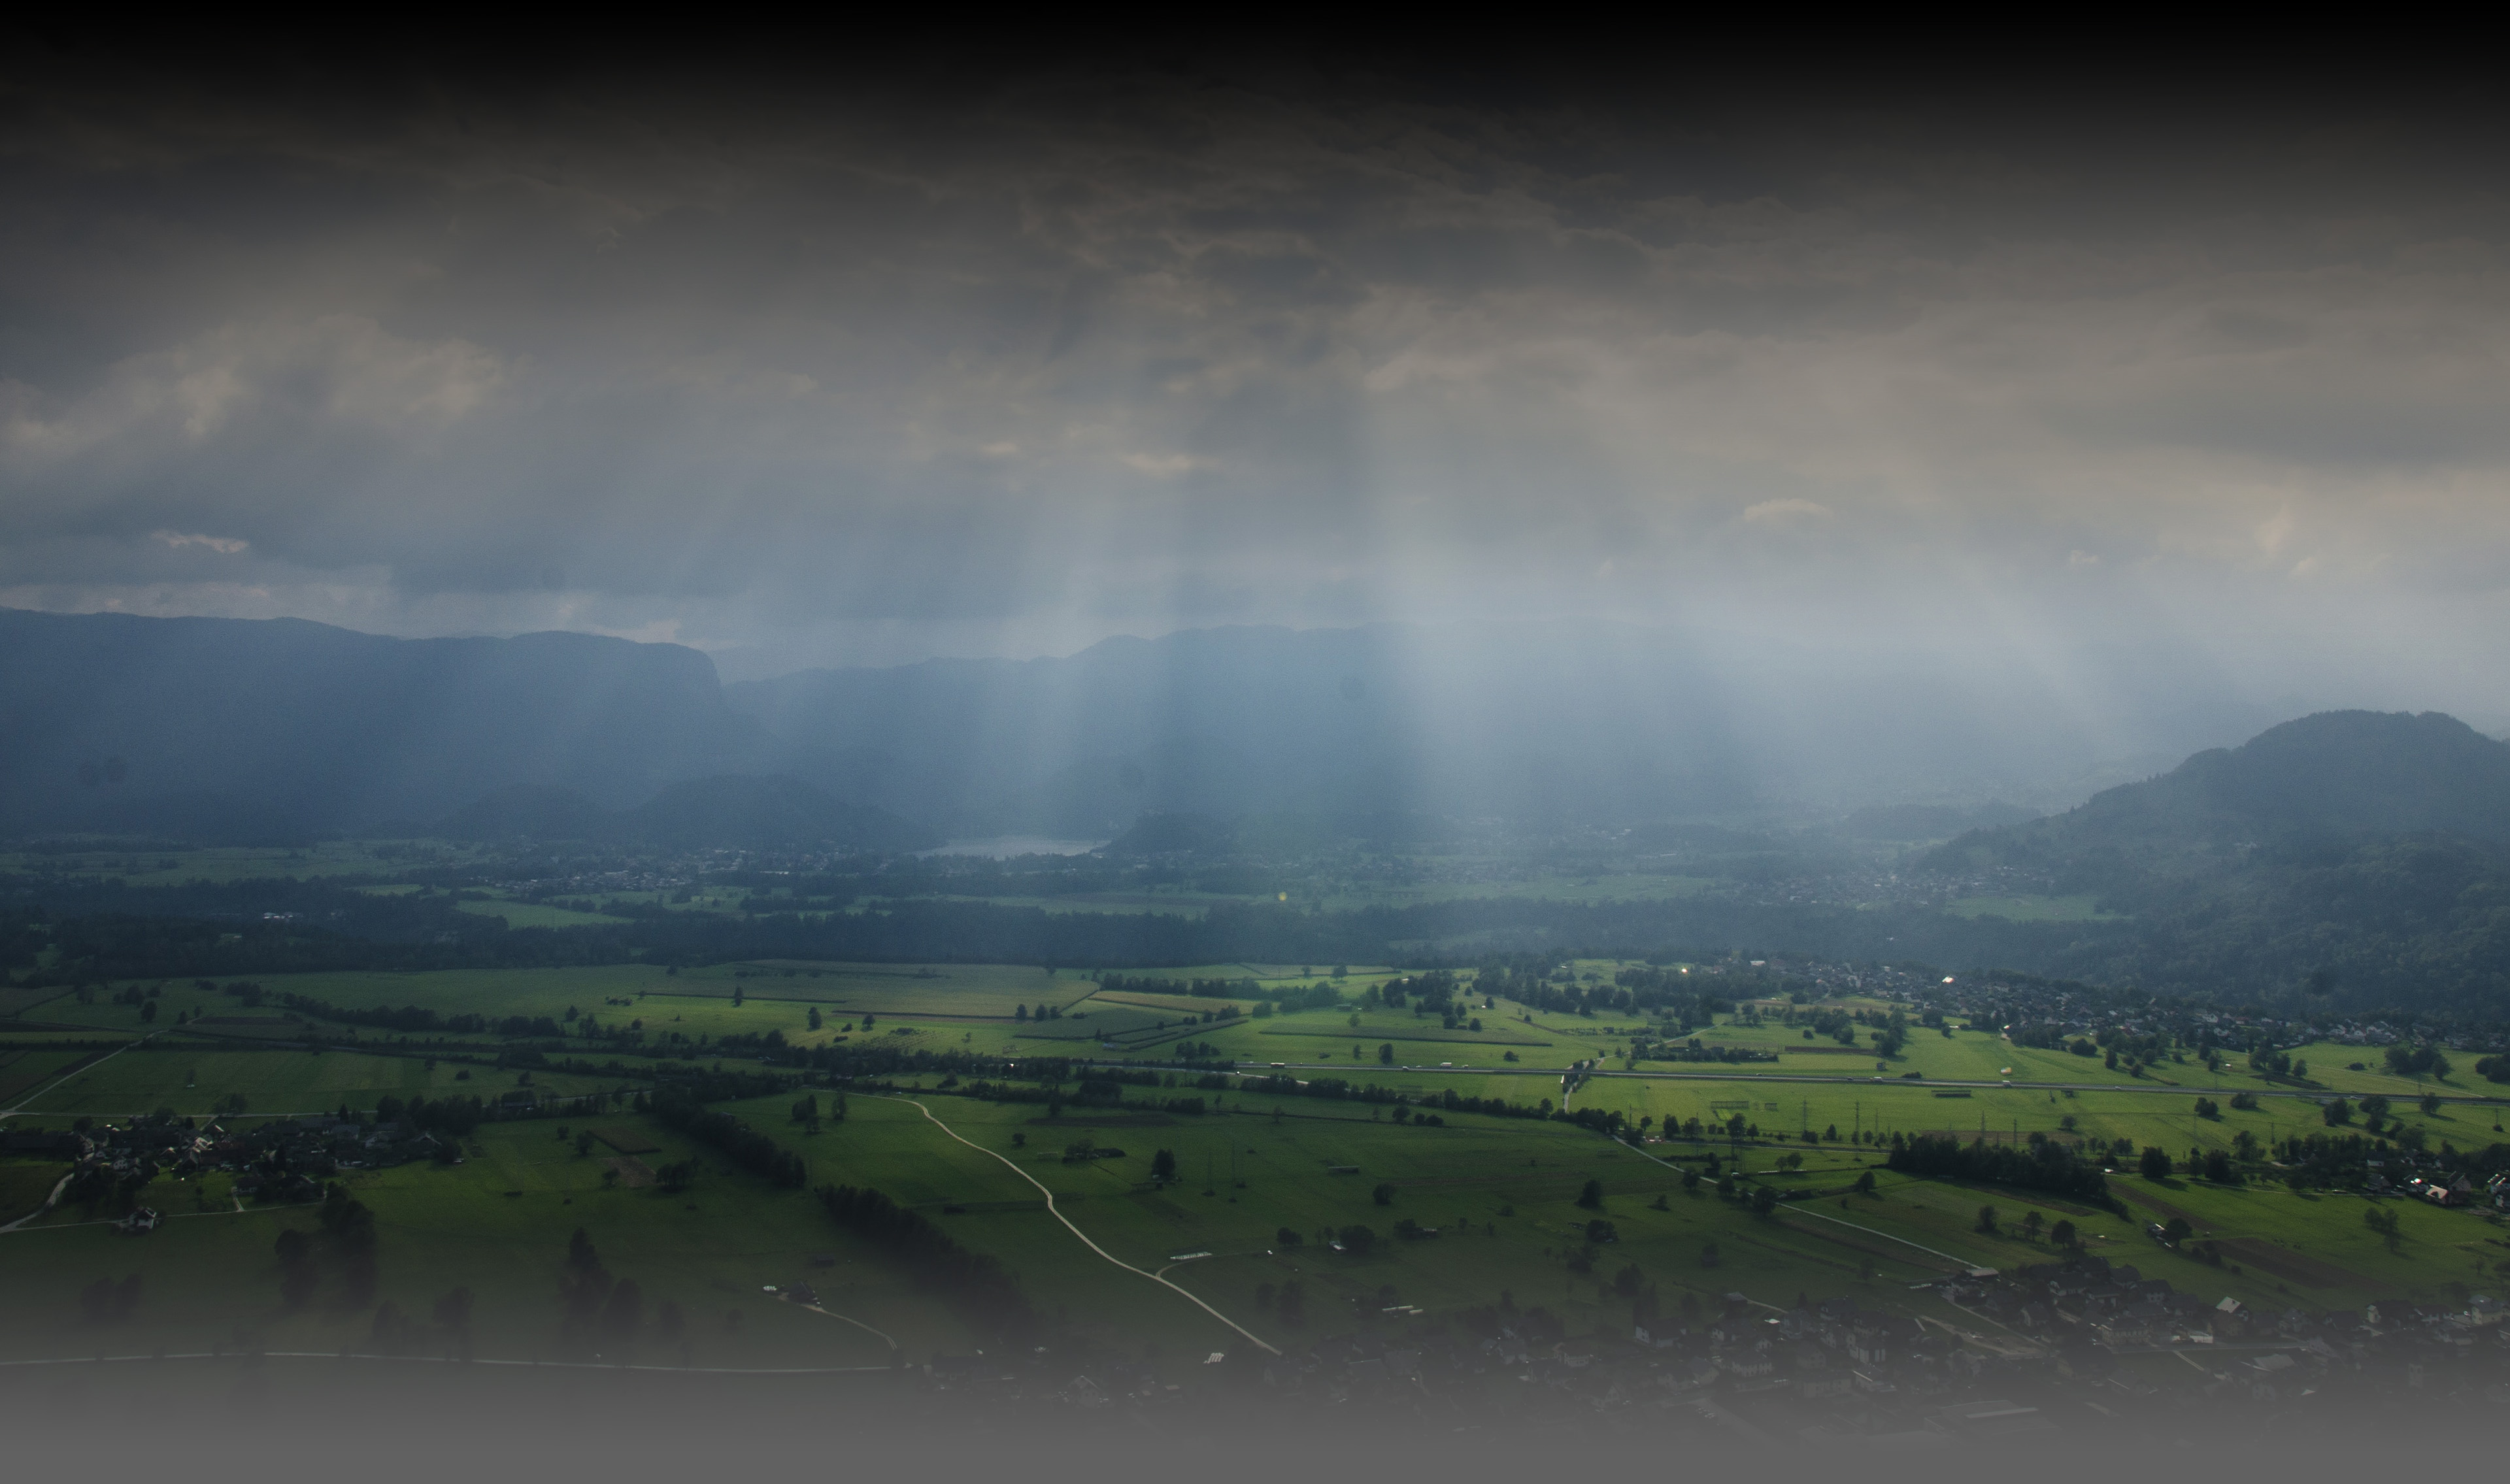 Sun filtering through clouds over a green valley